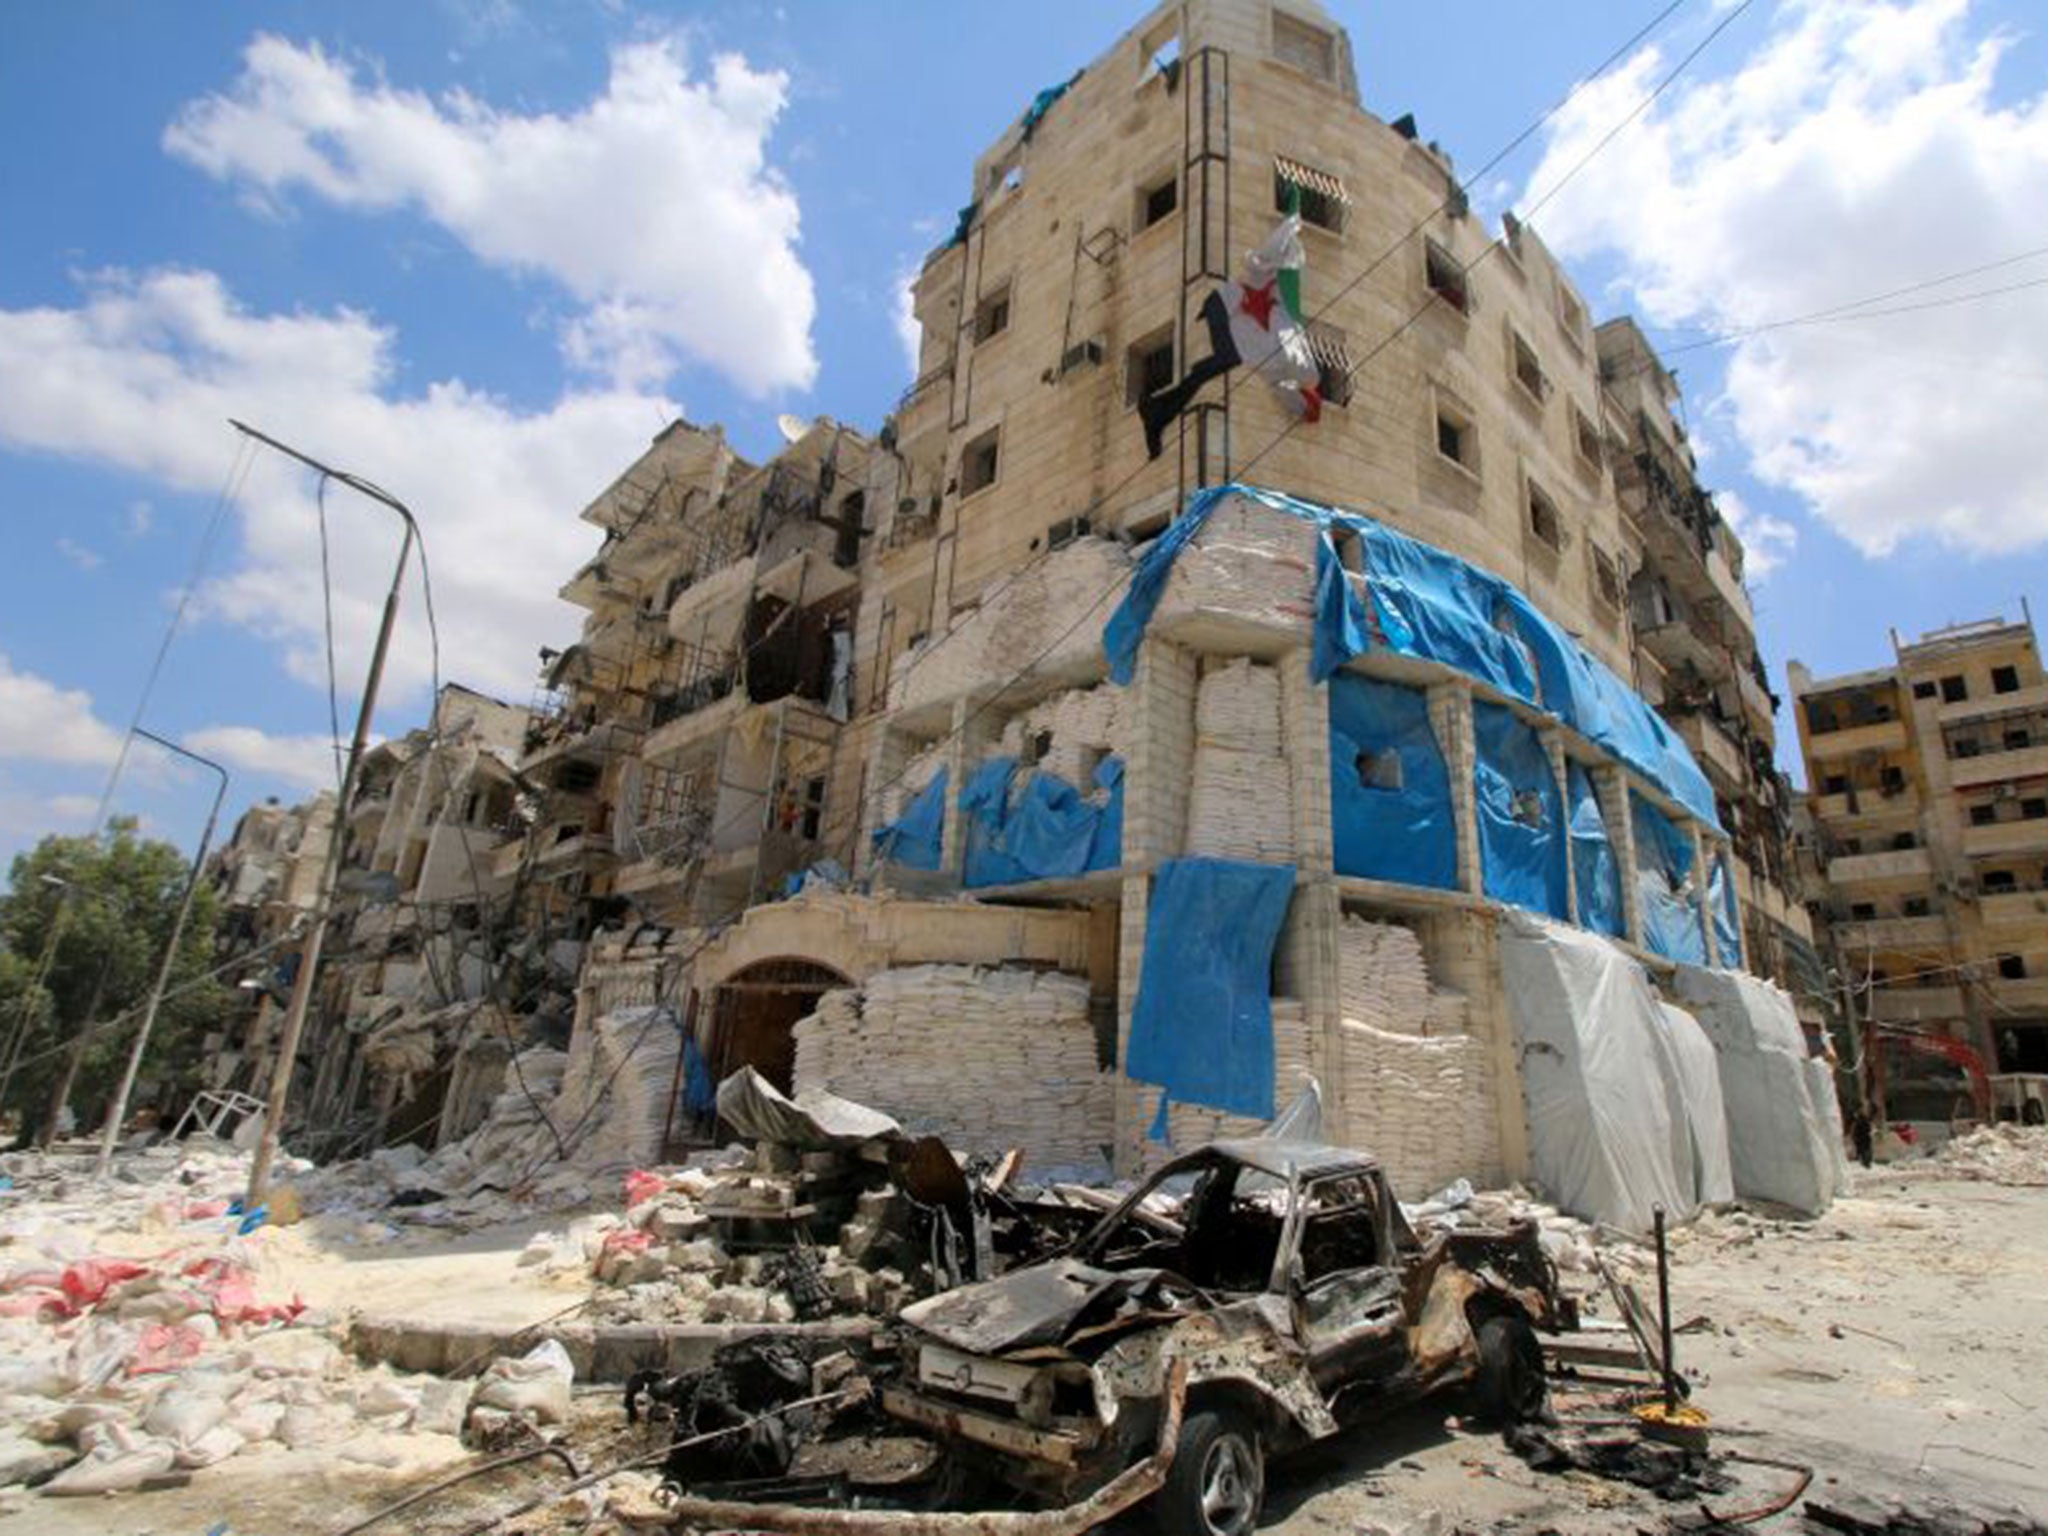 The attacks inflicted significant damage on al-Quds hospital in the rebel-held area of Aleppo